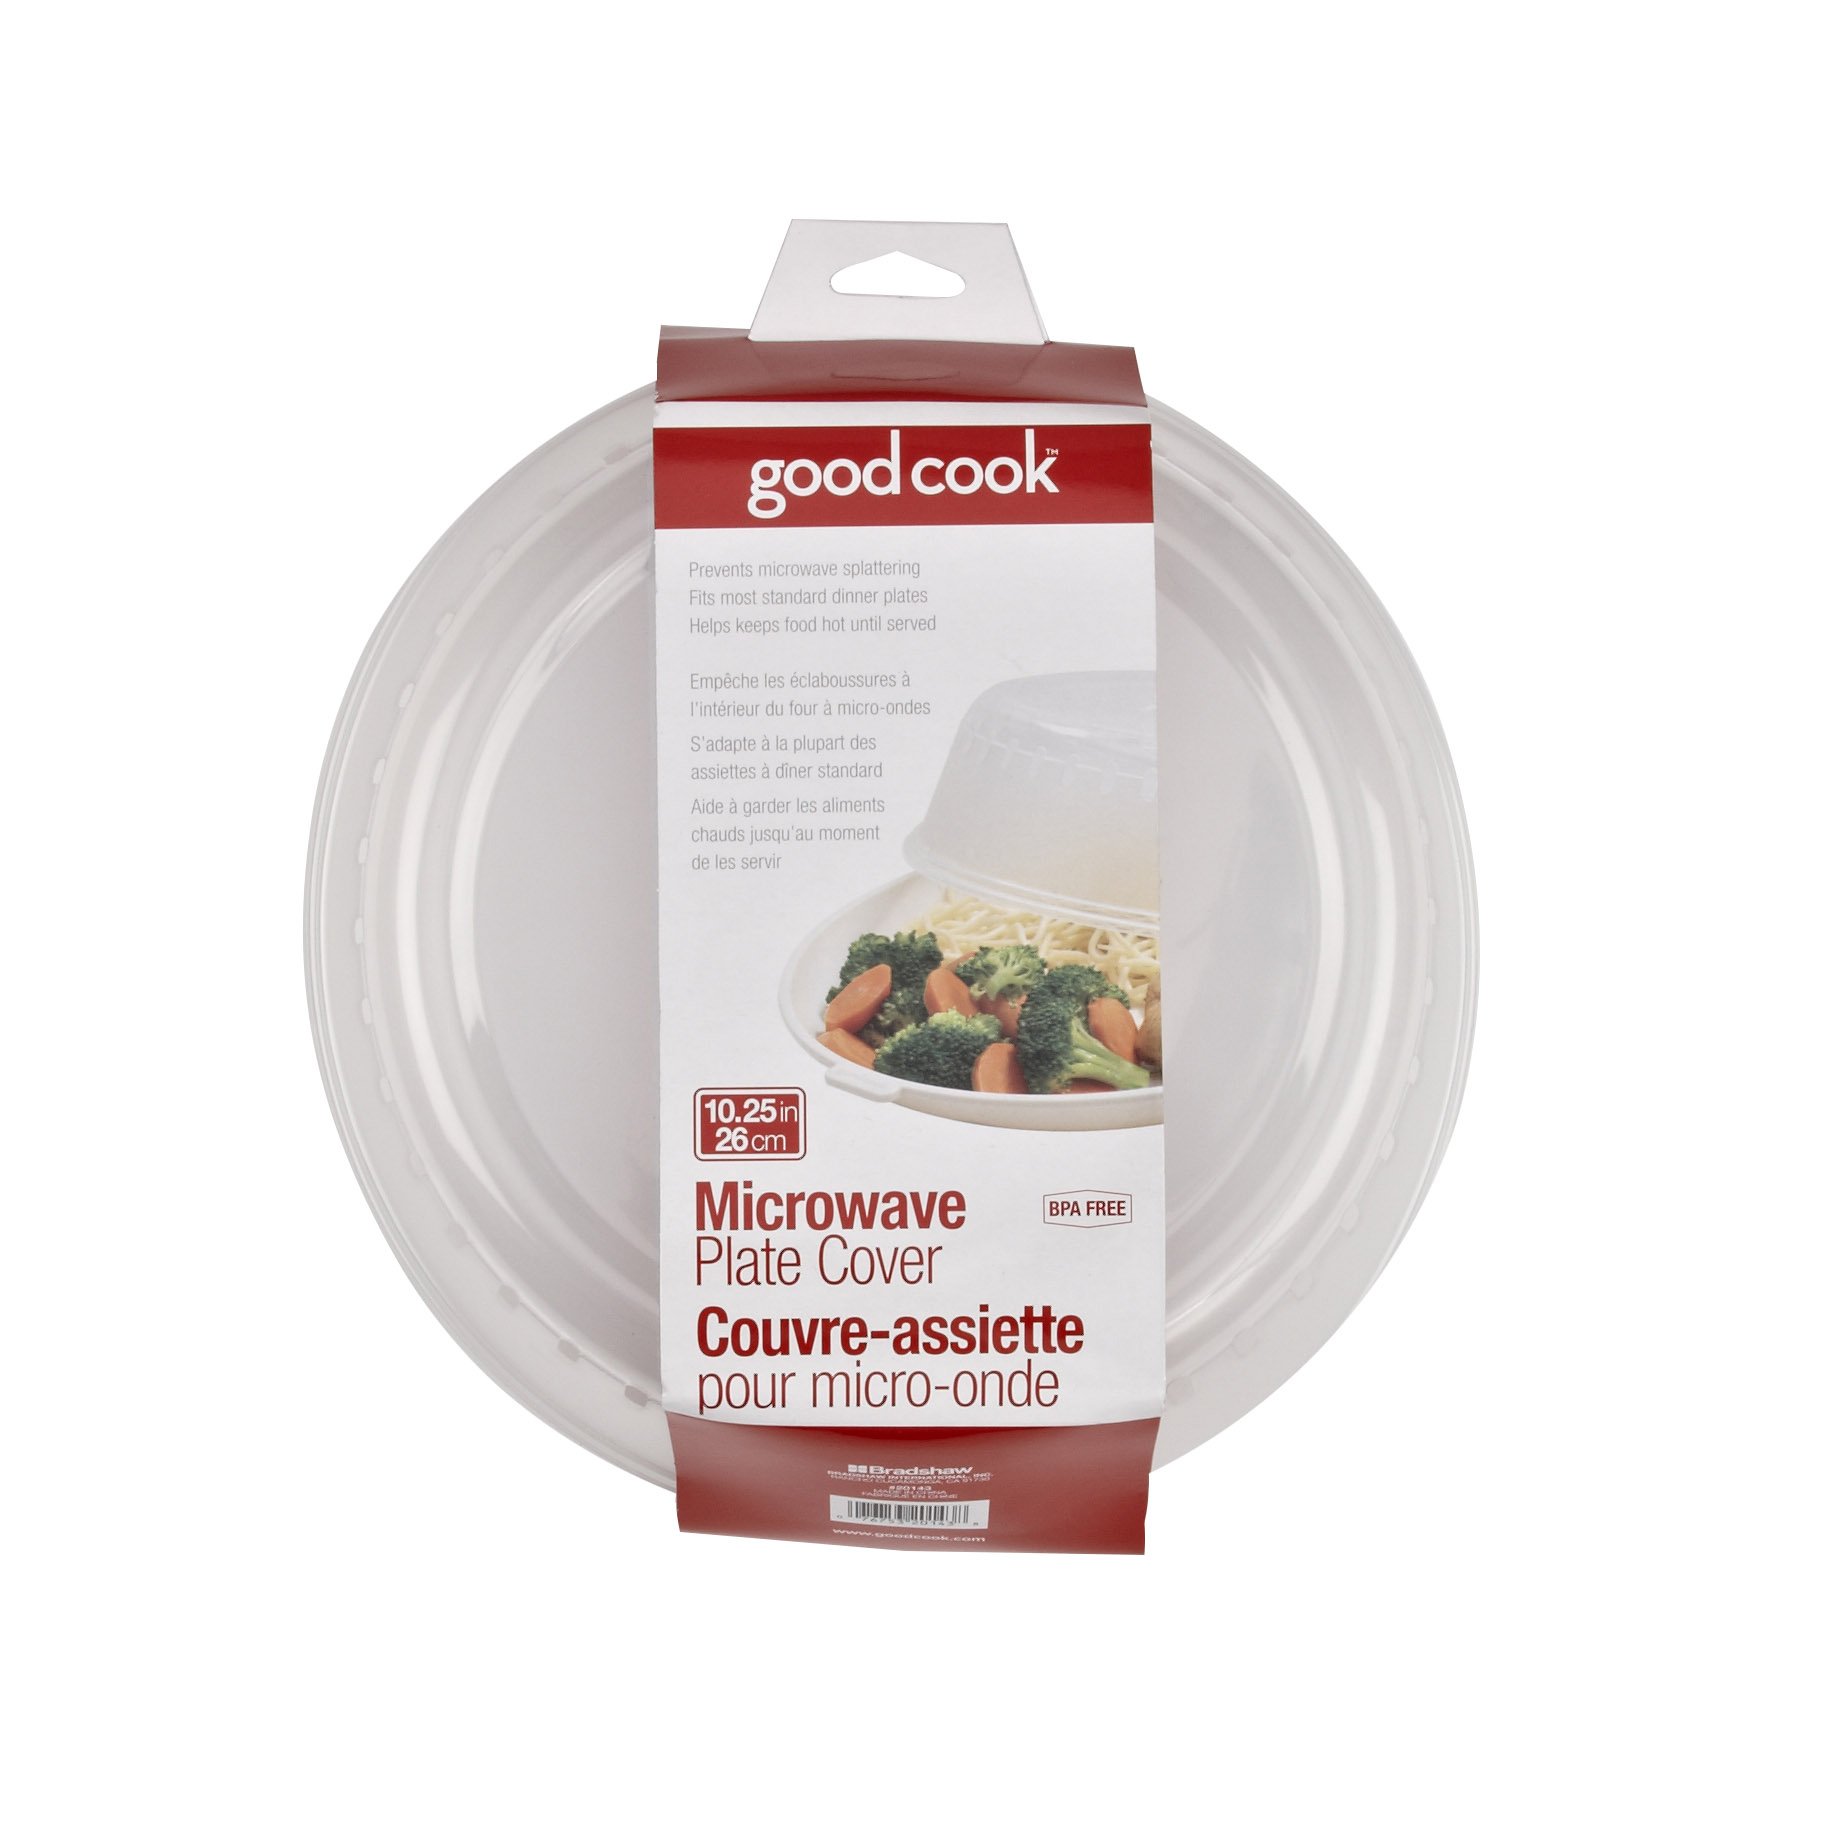 goodcook Microwave Plate cover